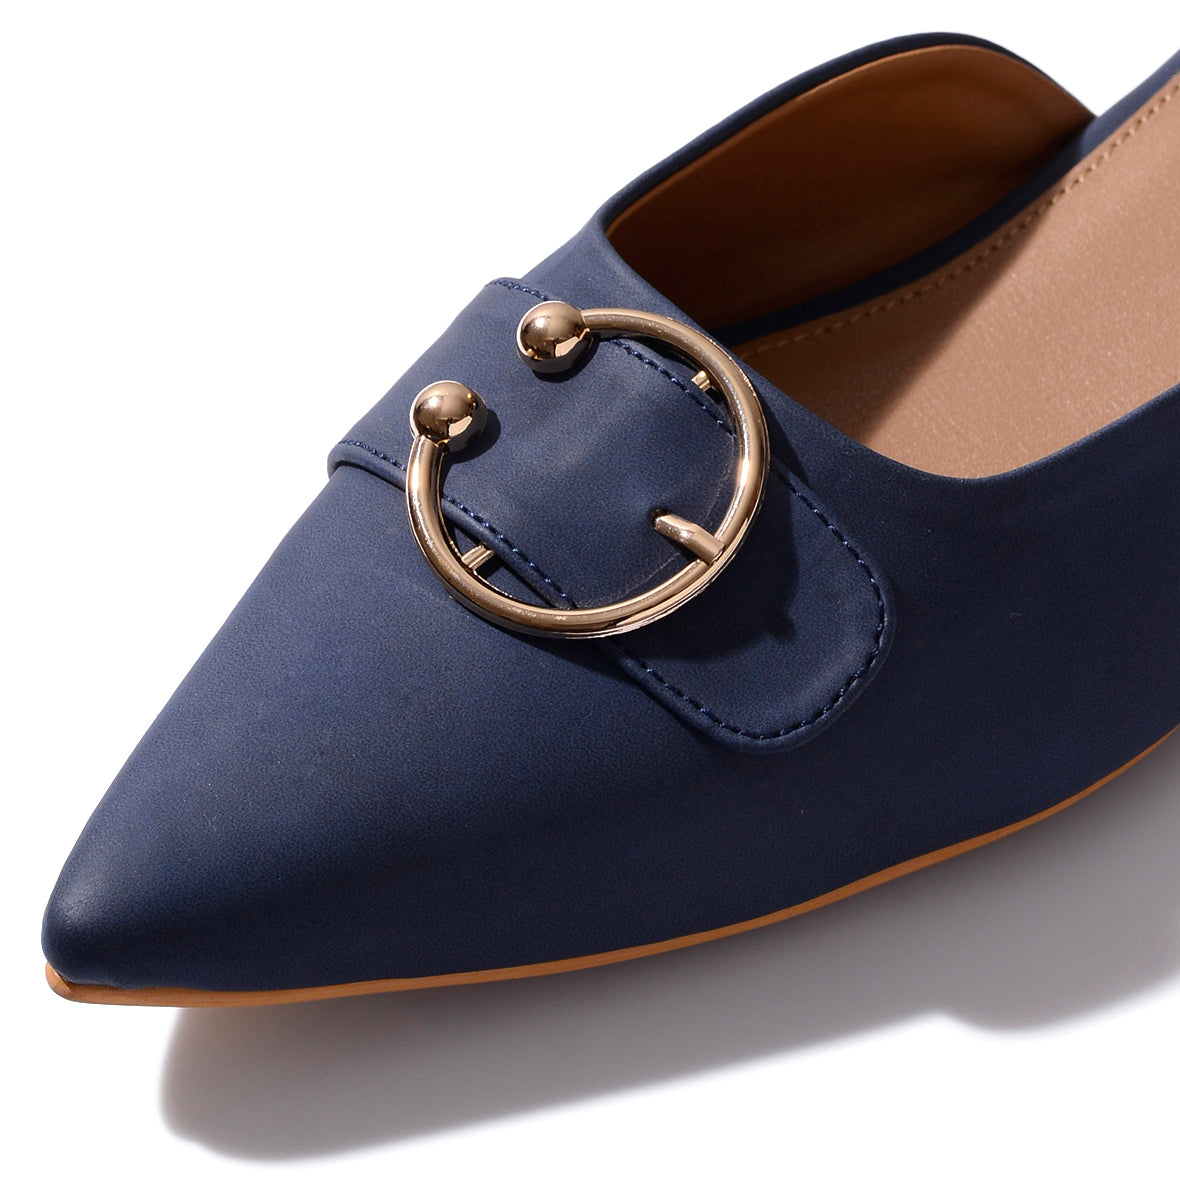 Blue Suede Buckled Mules